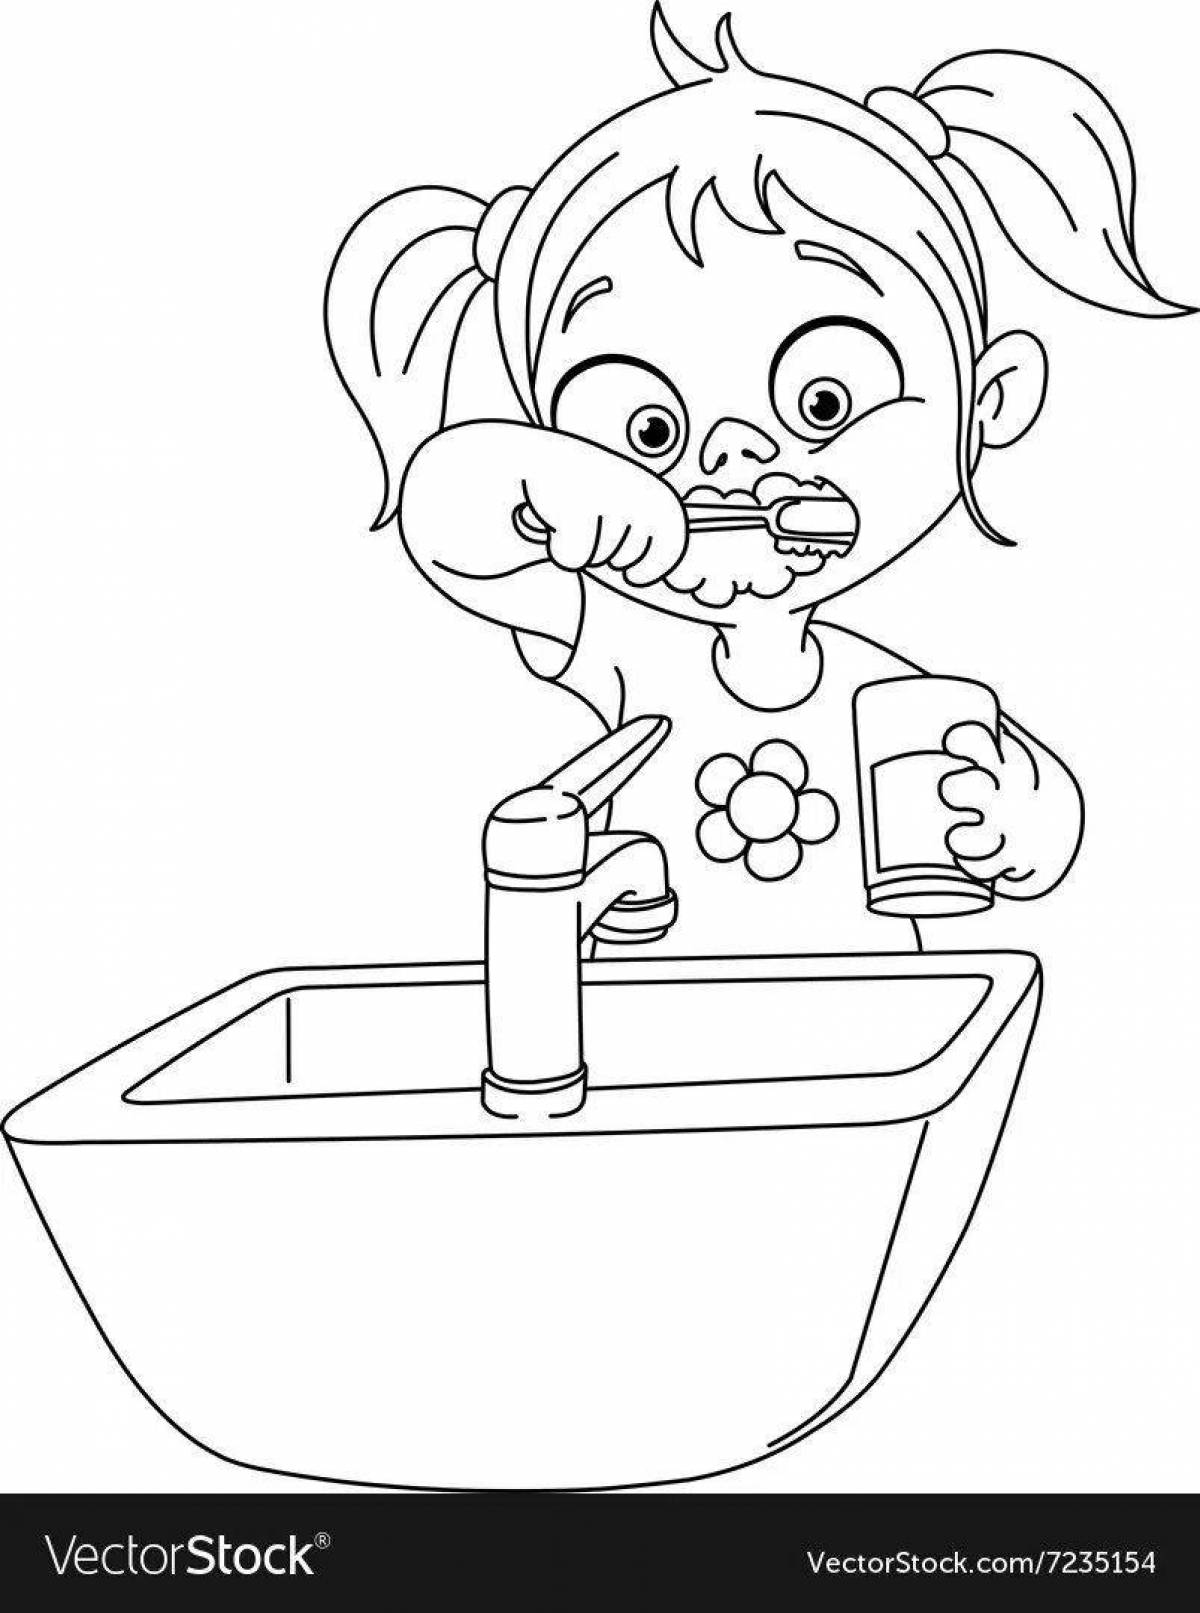 Colorful hygiene coloring pages for little students